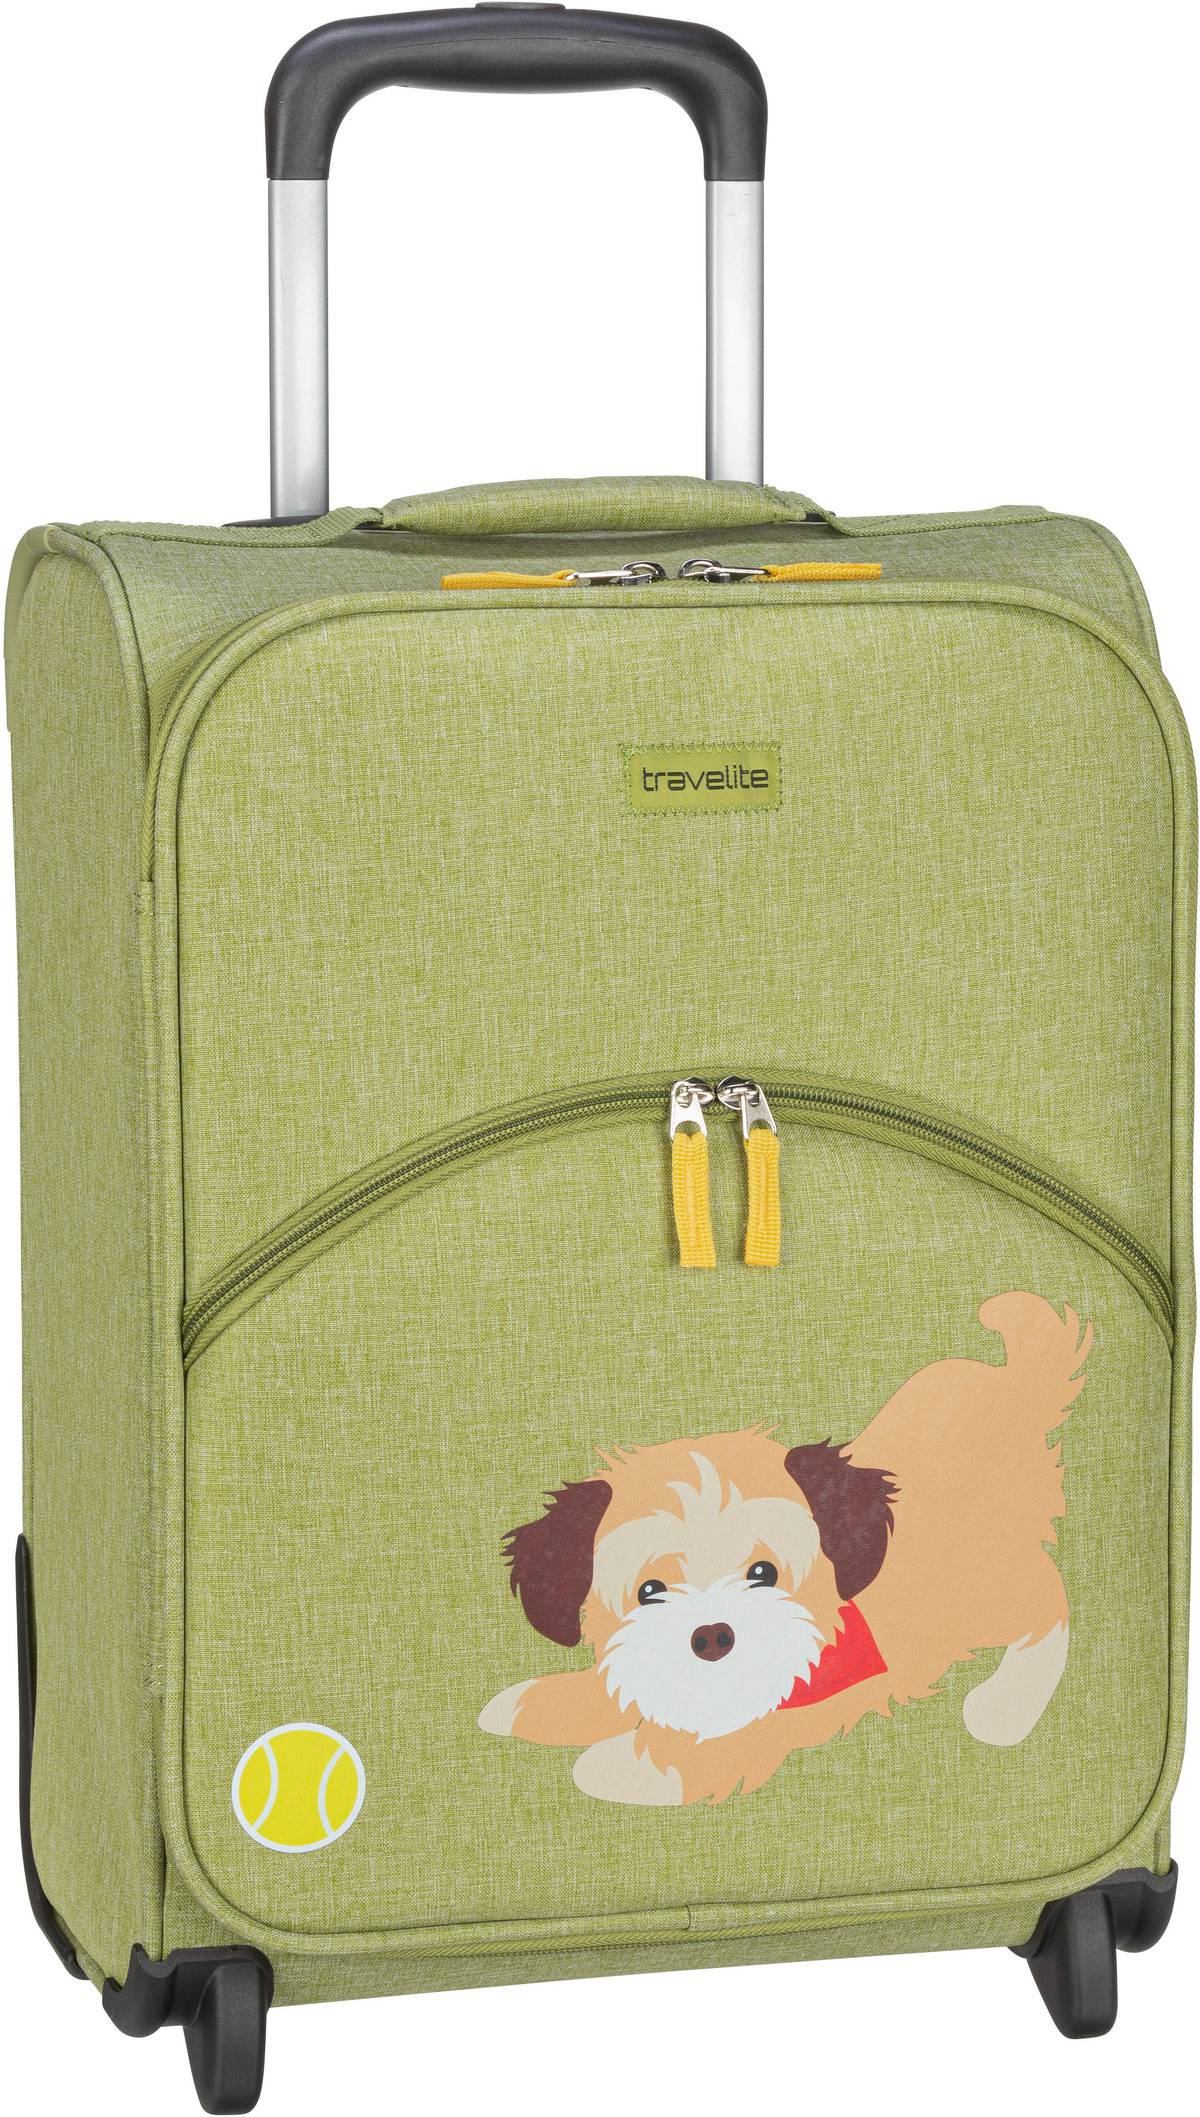 travelite Youngster Kindertrolley - Hund